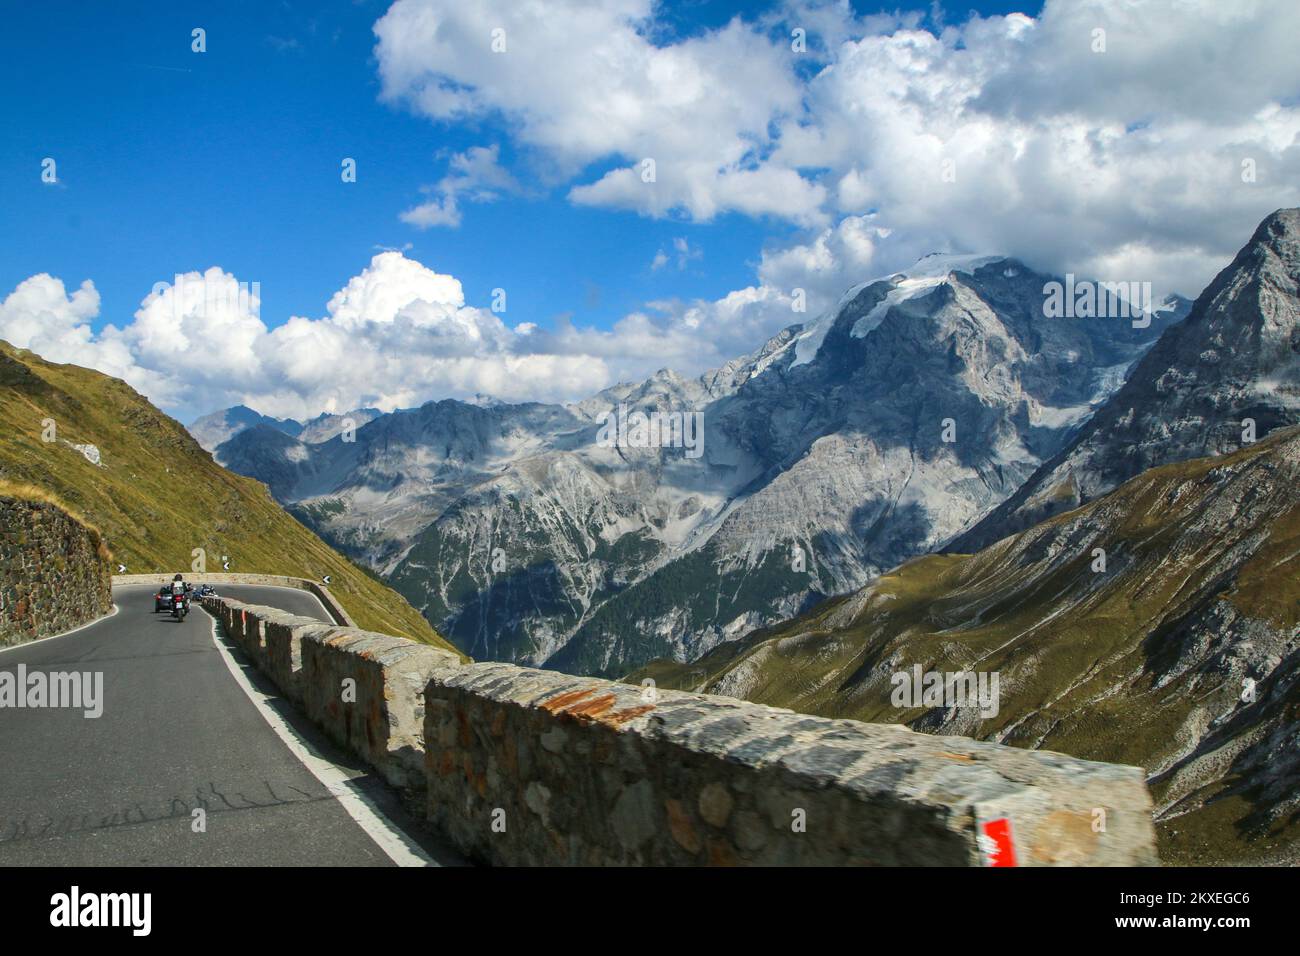 The drive through the hairpins of the challenging roads down the famous Stelvio Pass in the italian Alps, close to Switzerland. Stock Photo